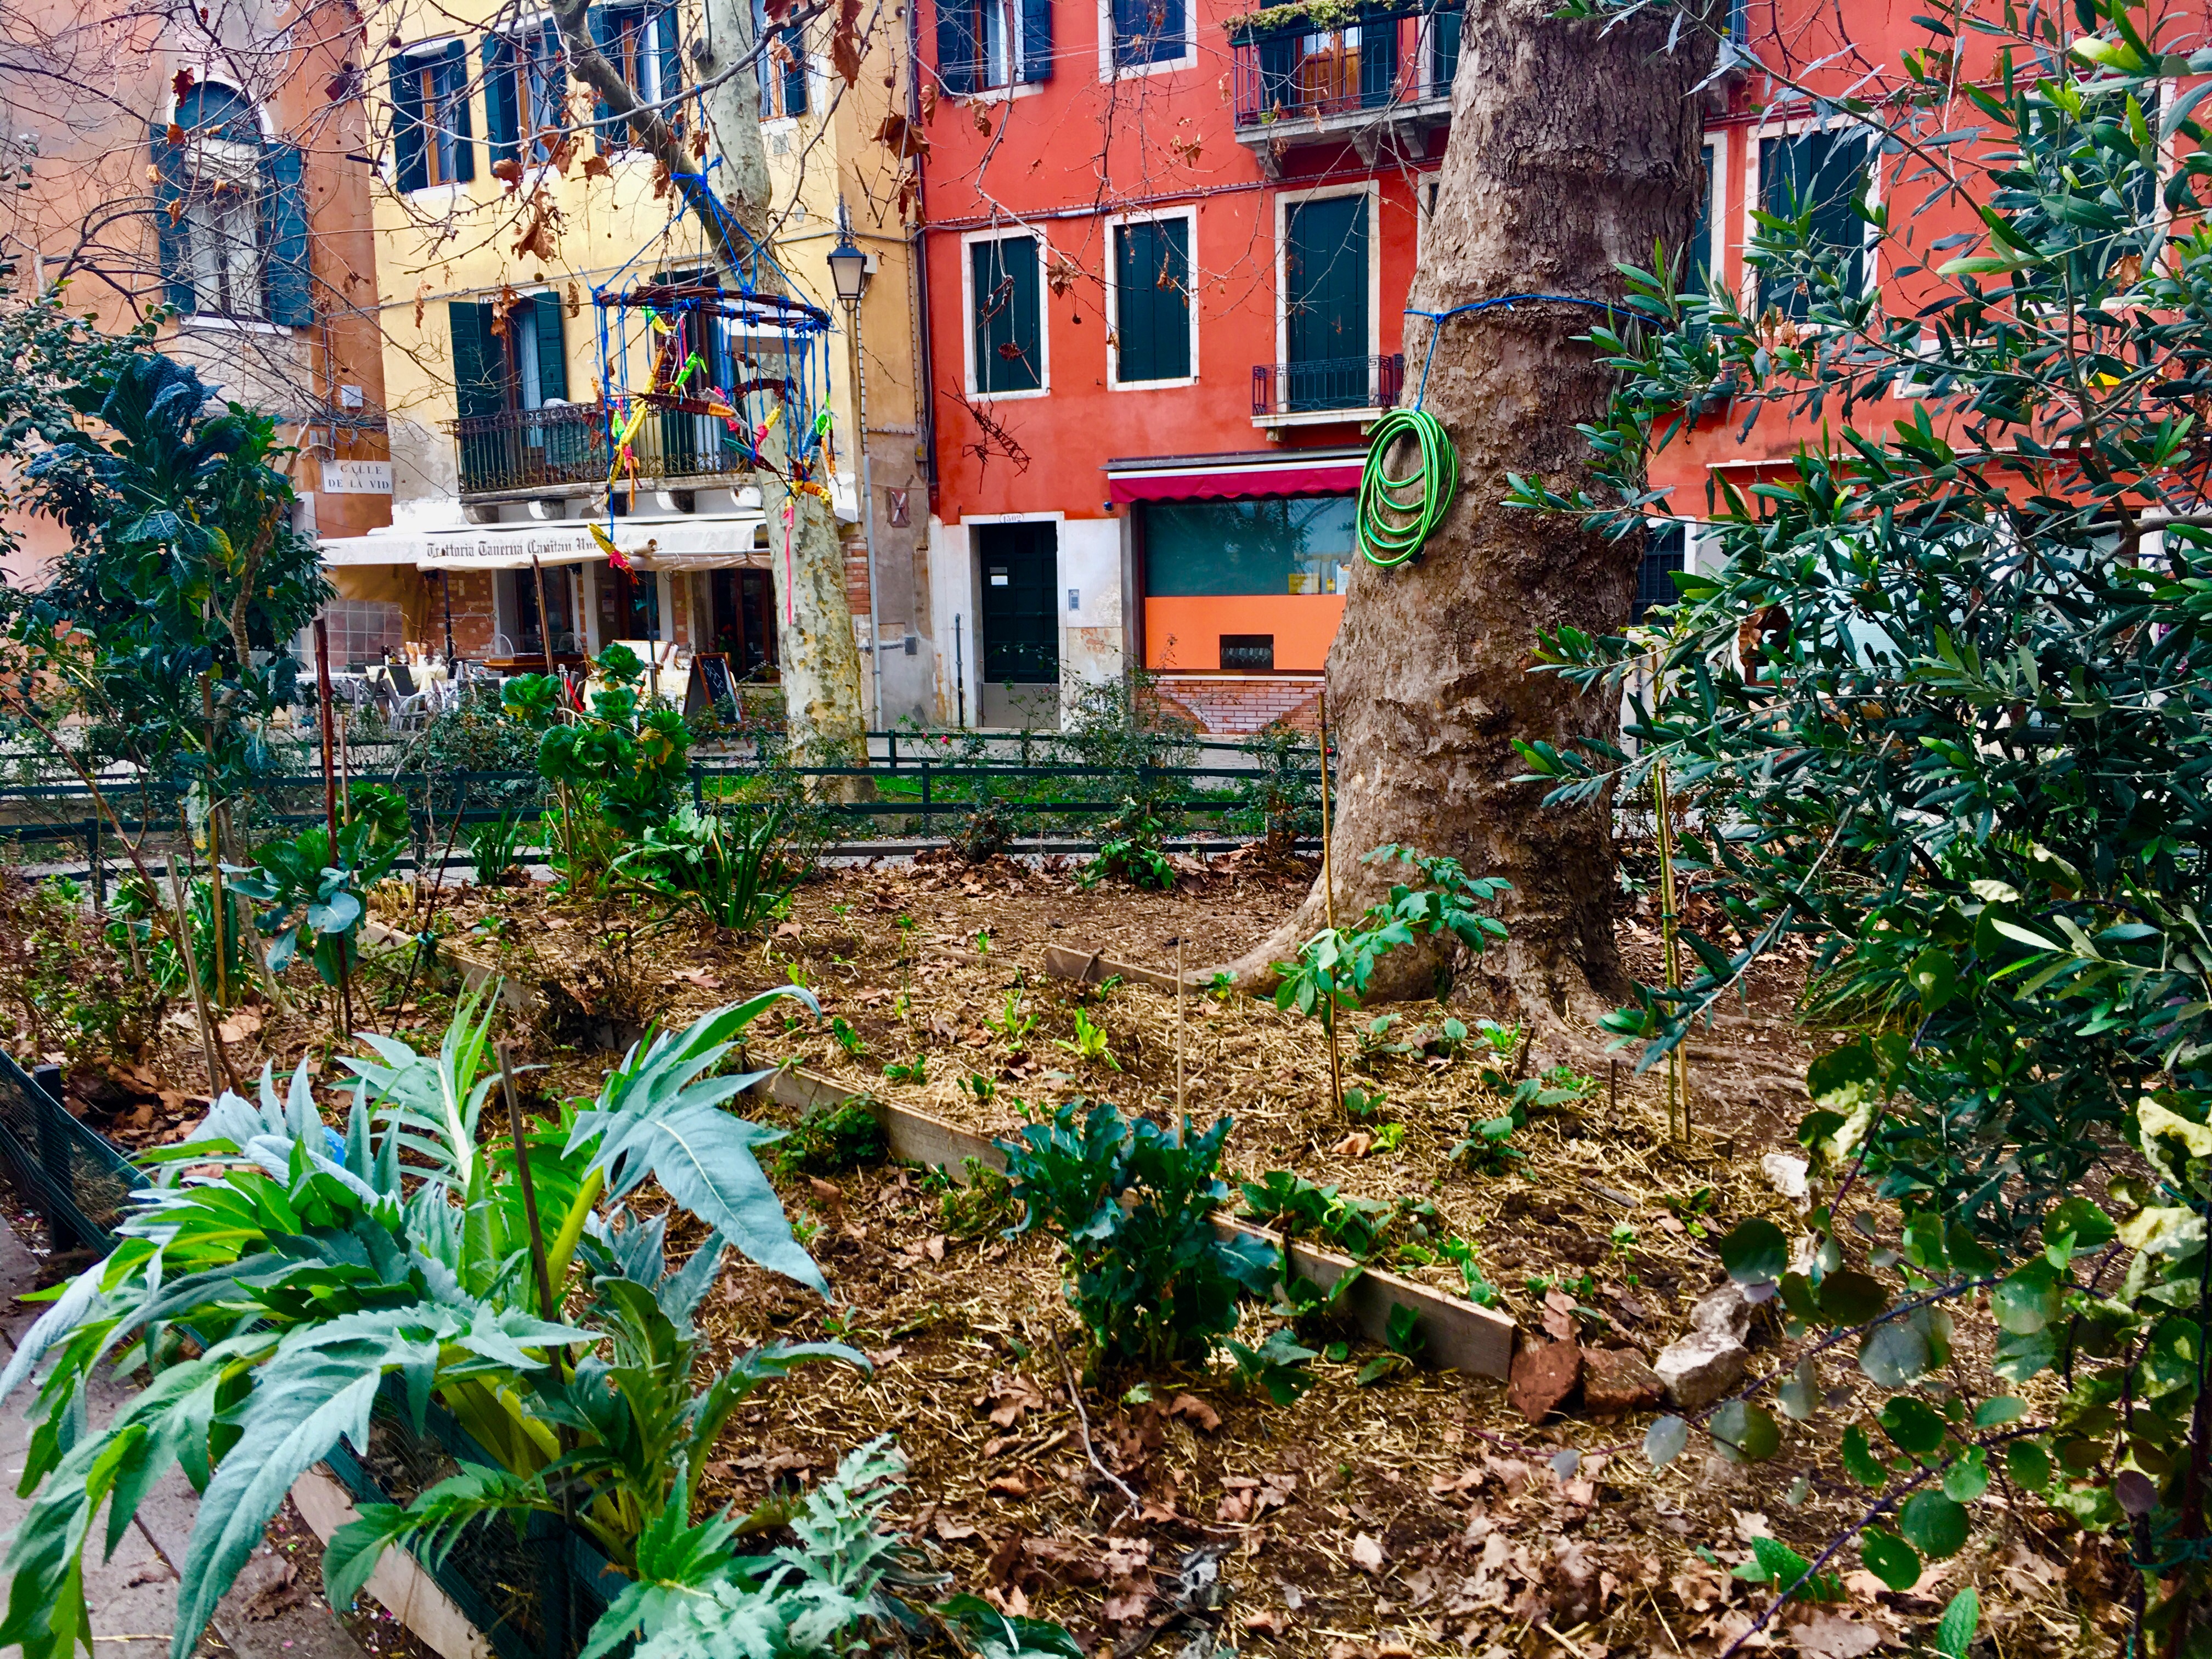 Venice’s Gardens and Green Space